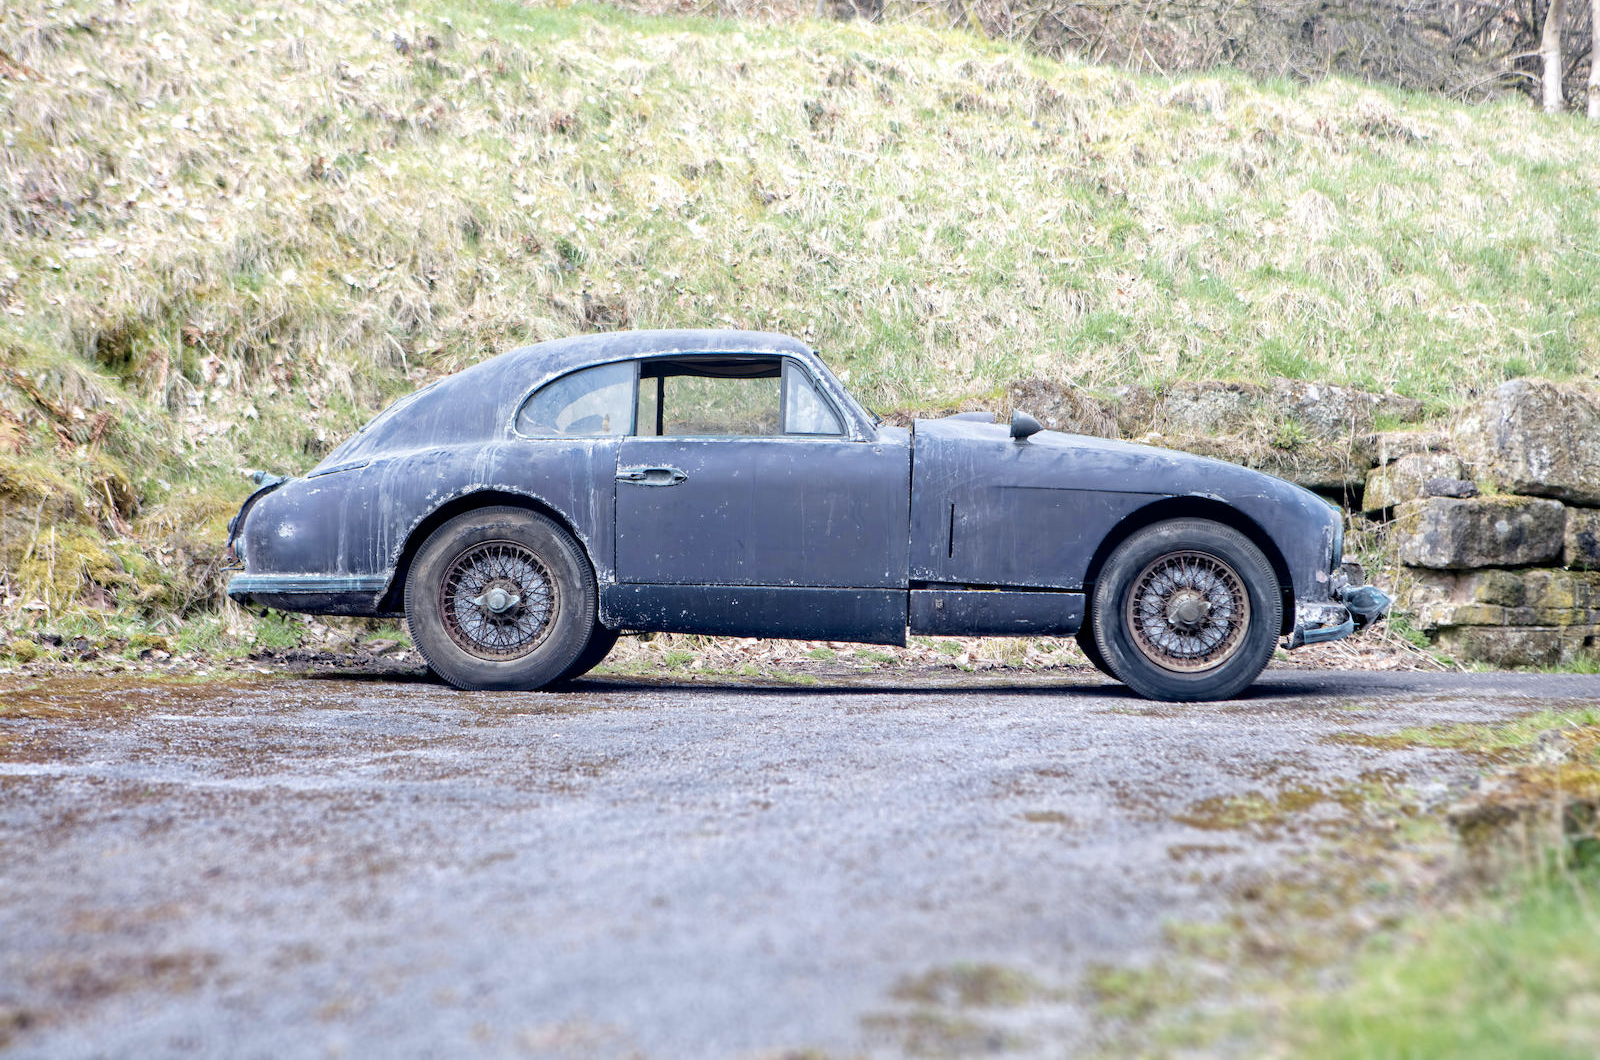 This ruined Aston Martin could be yours for £50K